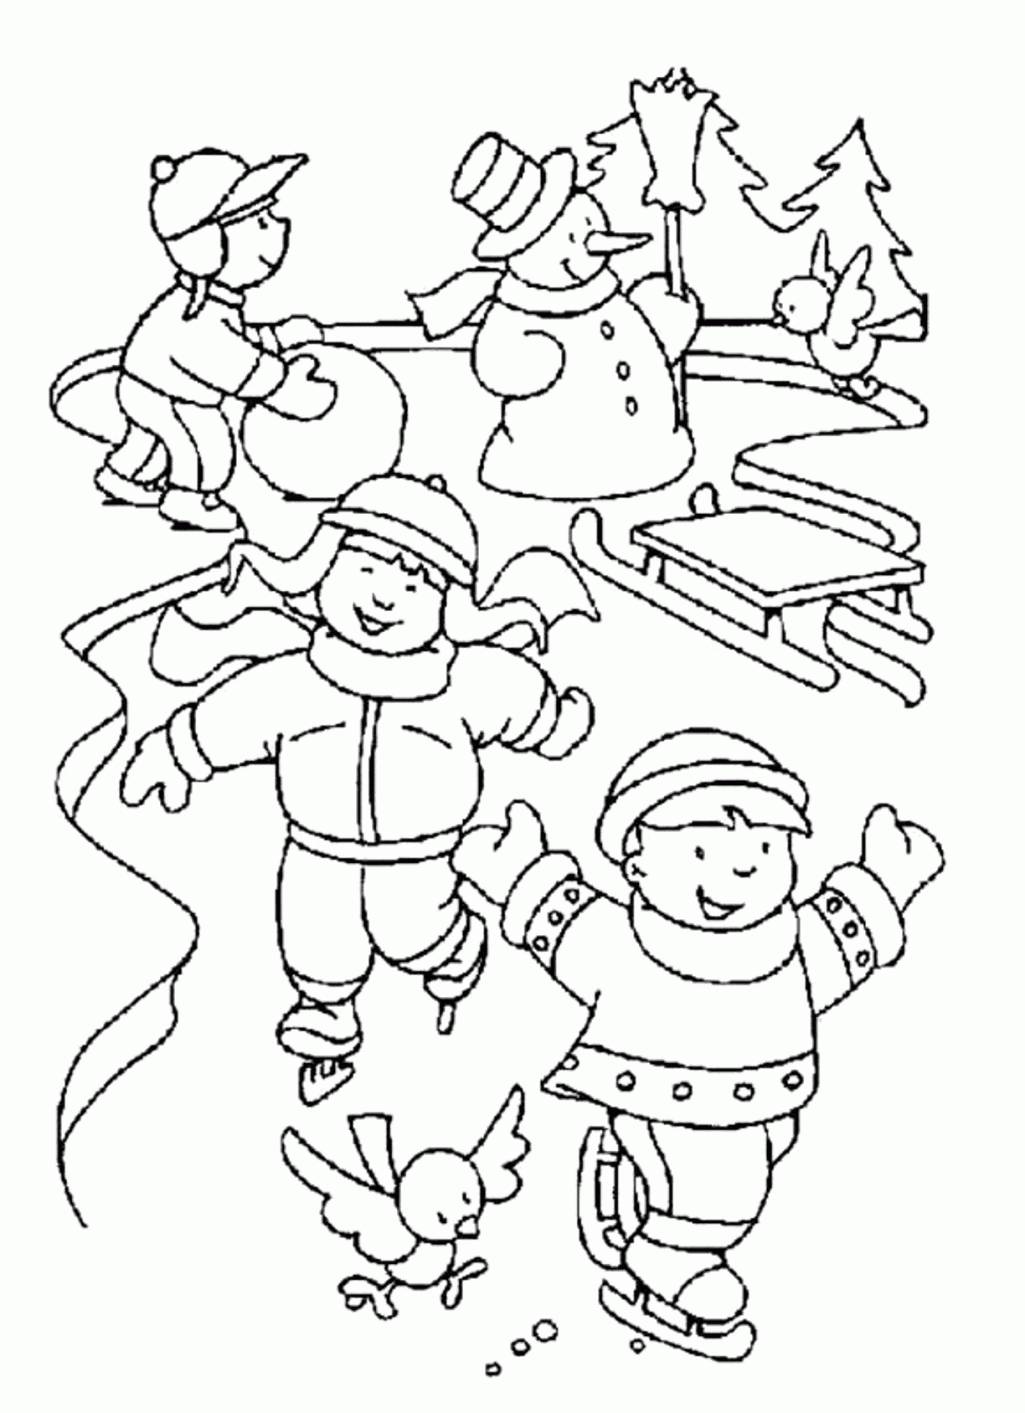 Christmas Coloring Worksheets For First Grade - Coloring